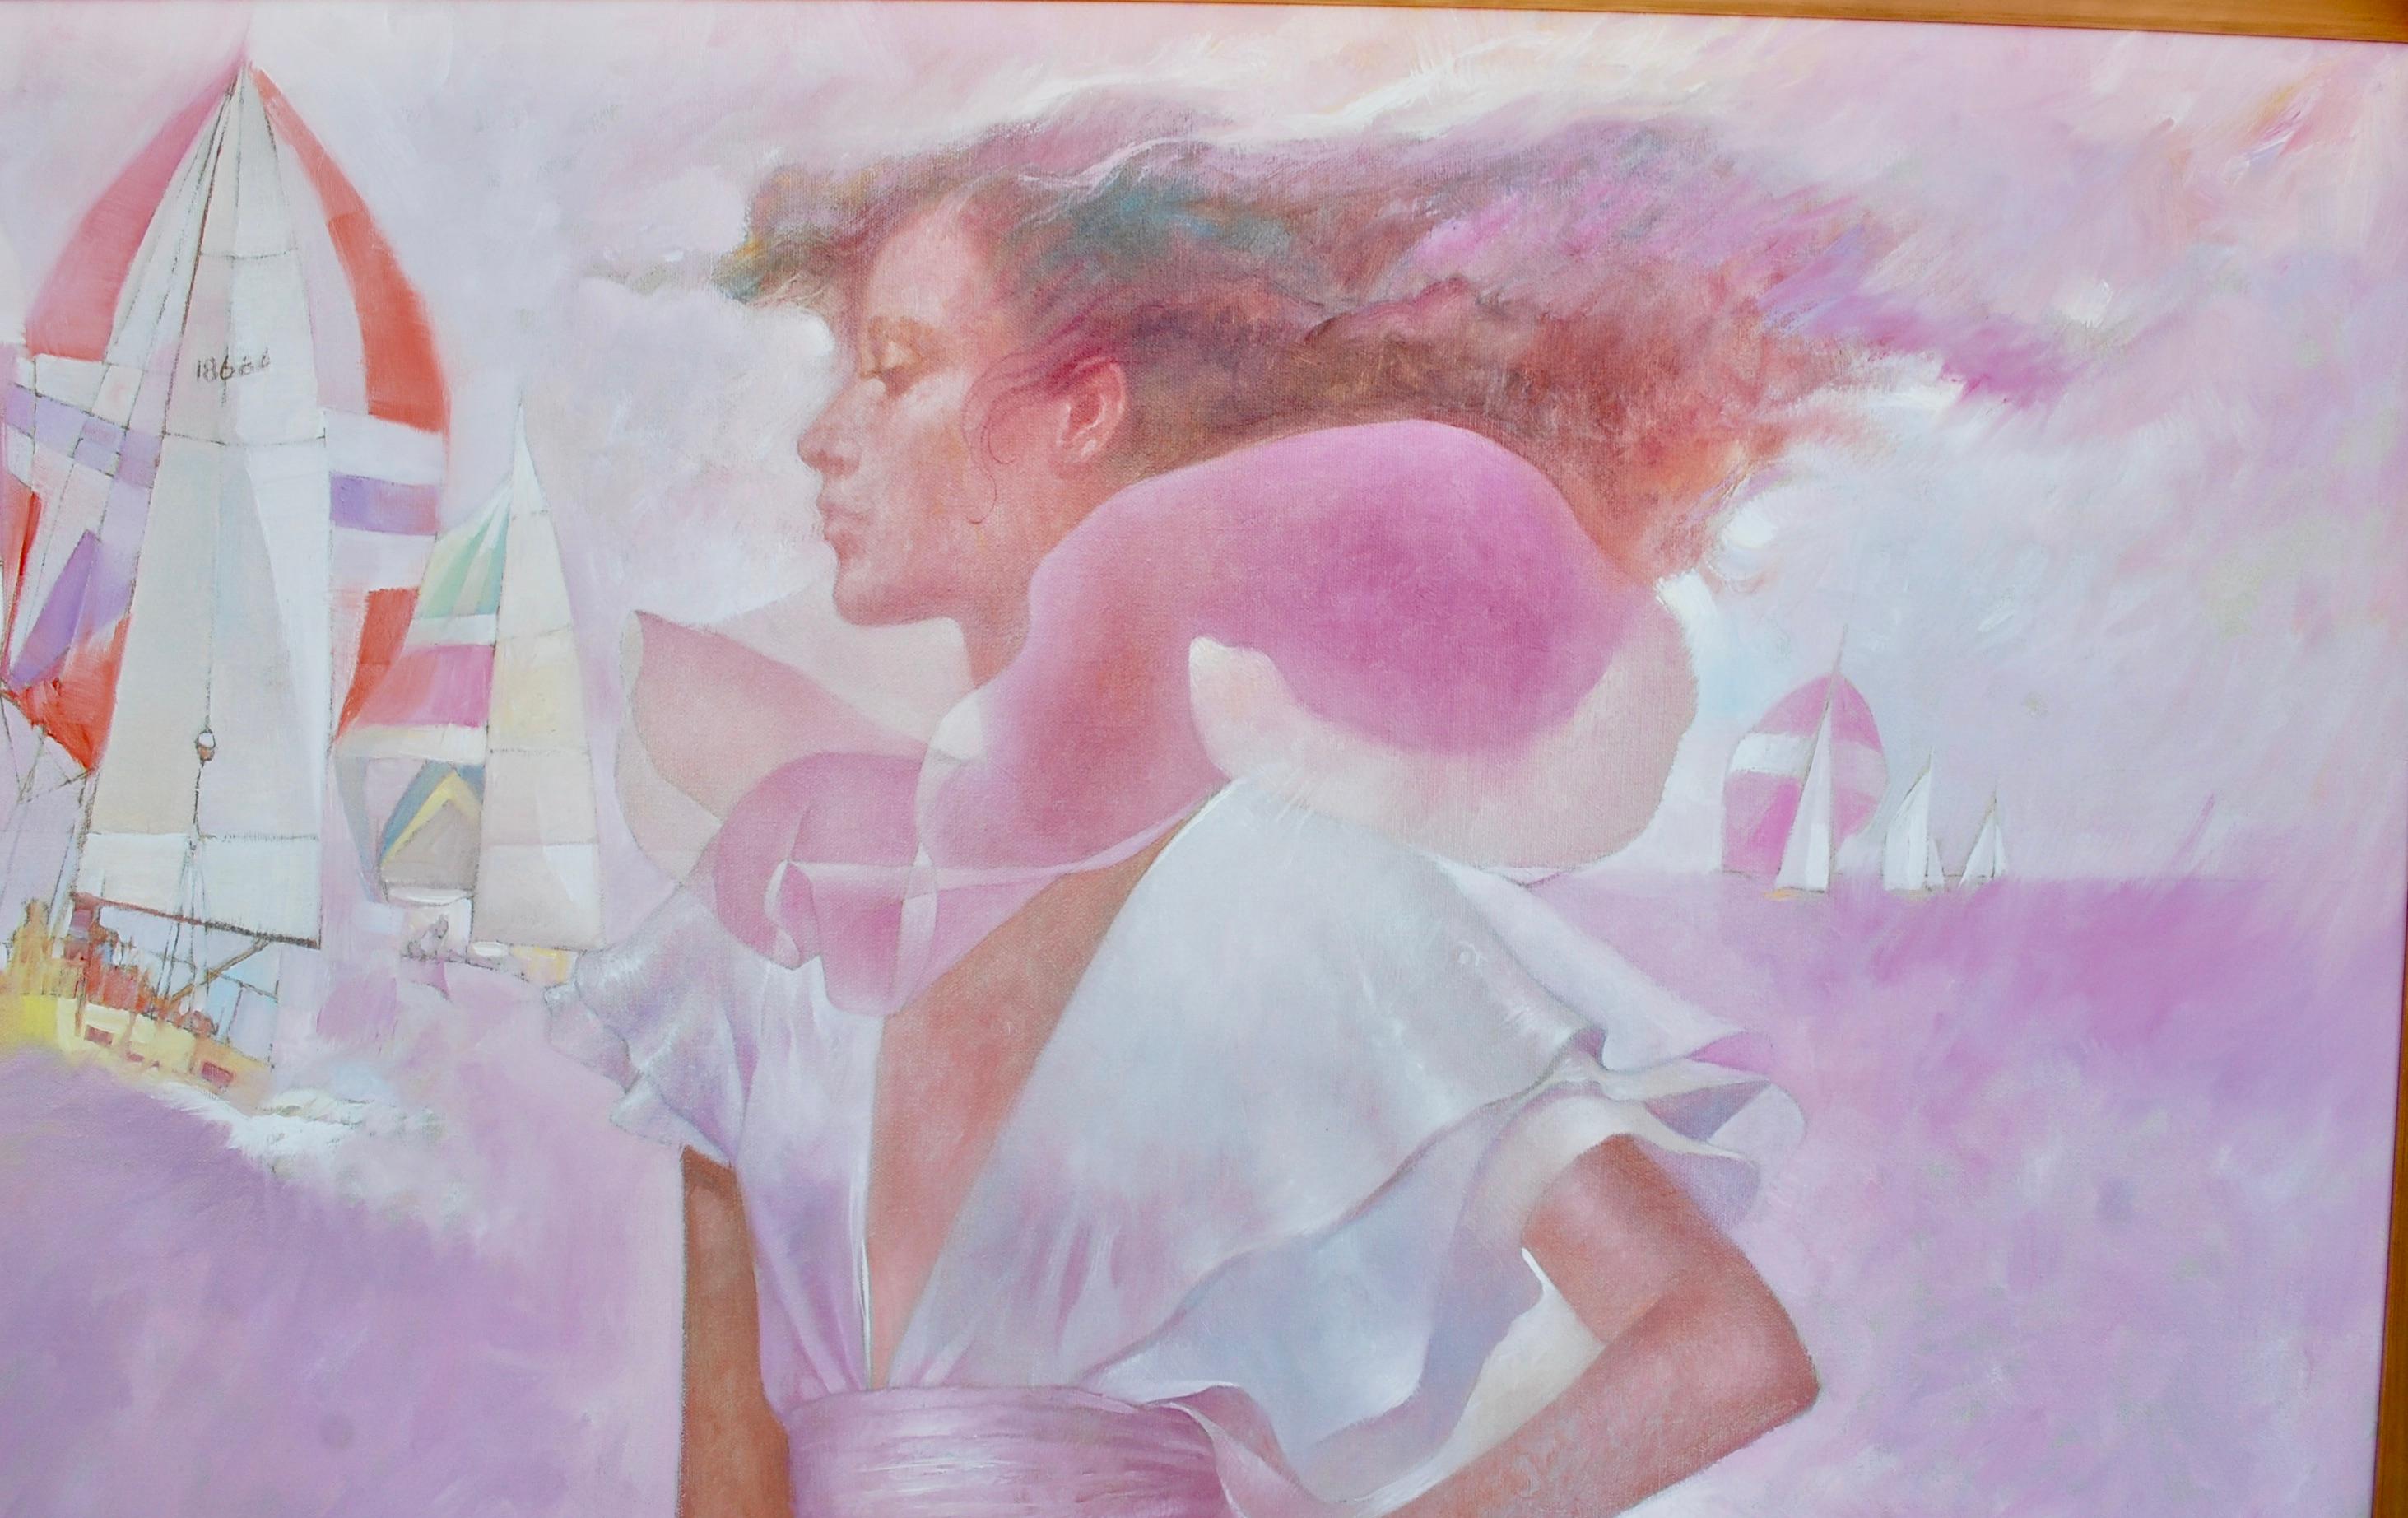 Marina large pink oil painting with woman and sail boats.
Artist signed, dated and titled, floater frame.
Ethereal oil on canvas figural painting, titled Playa Amarillo (Yellow Beach) work features a portrait of three female graces at the beach in